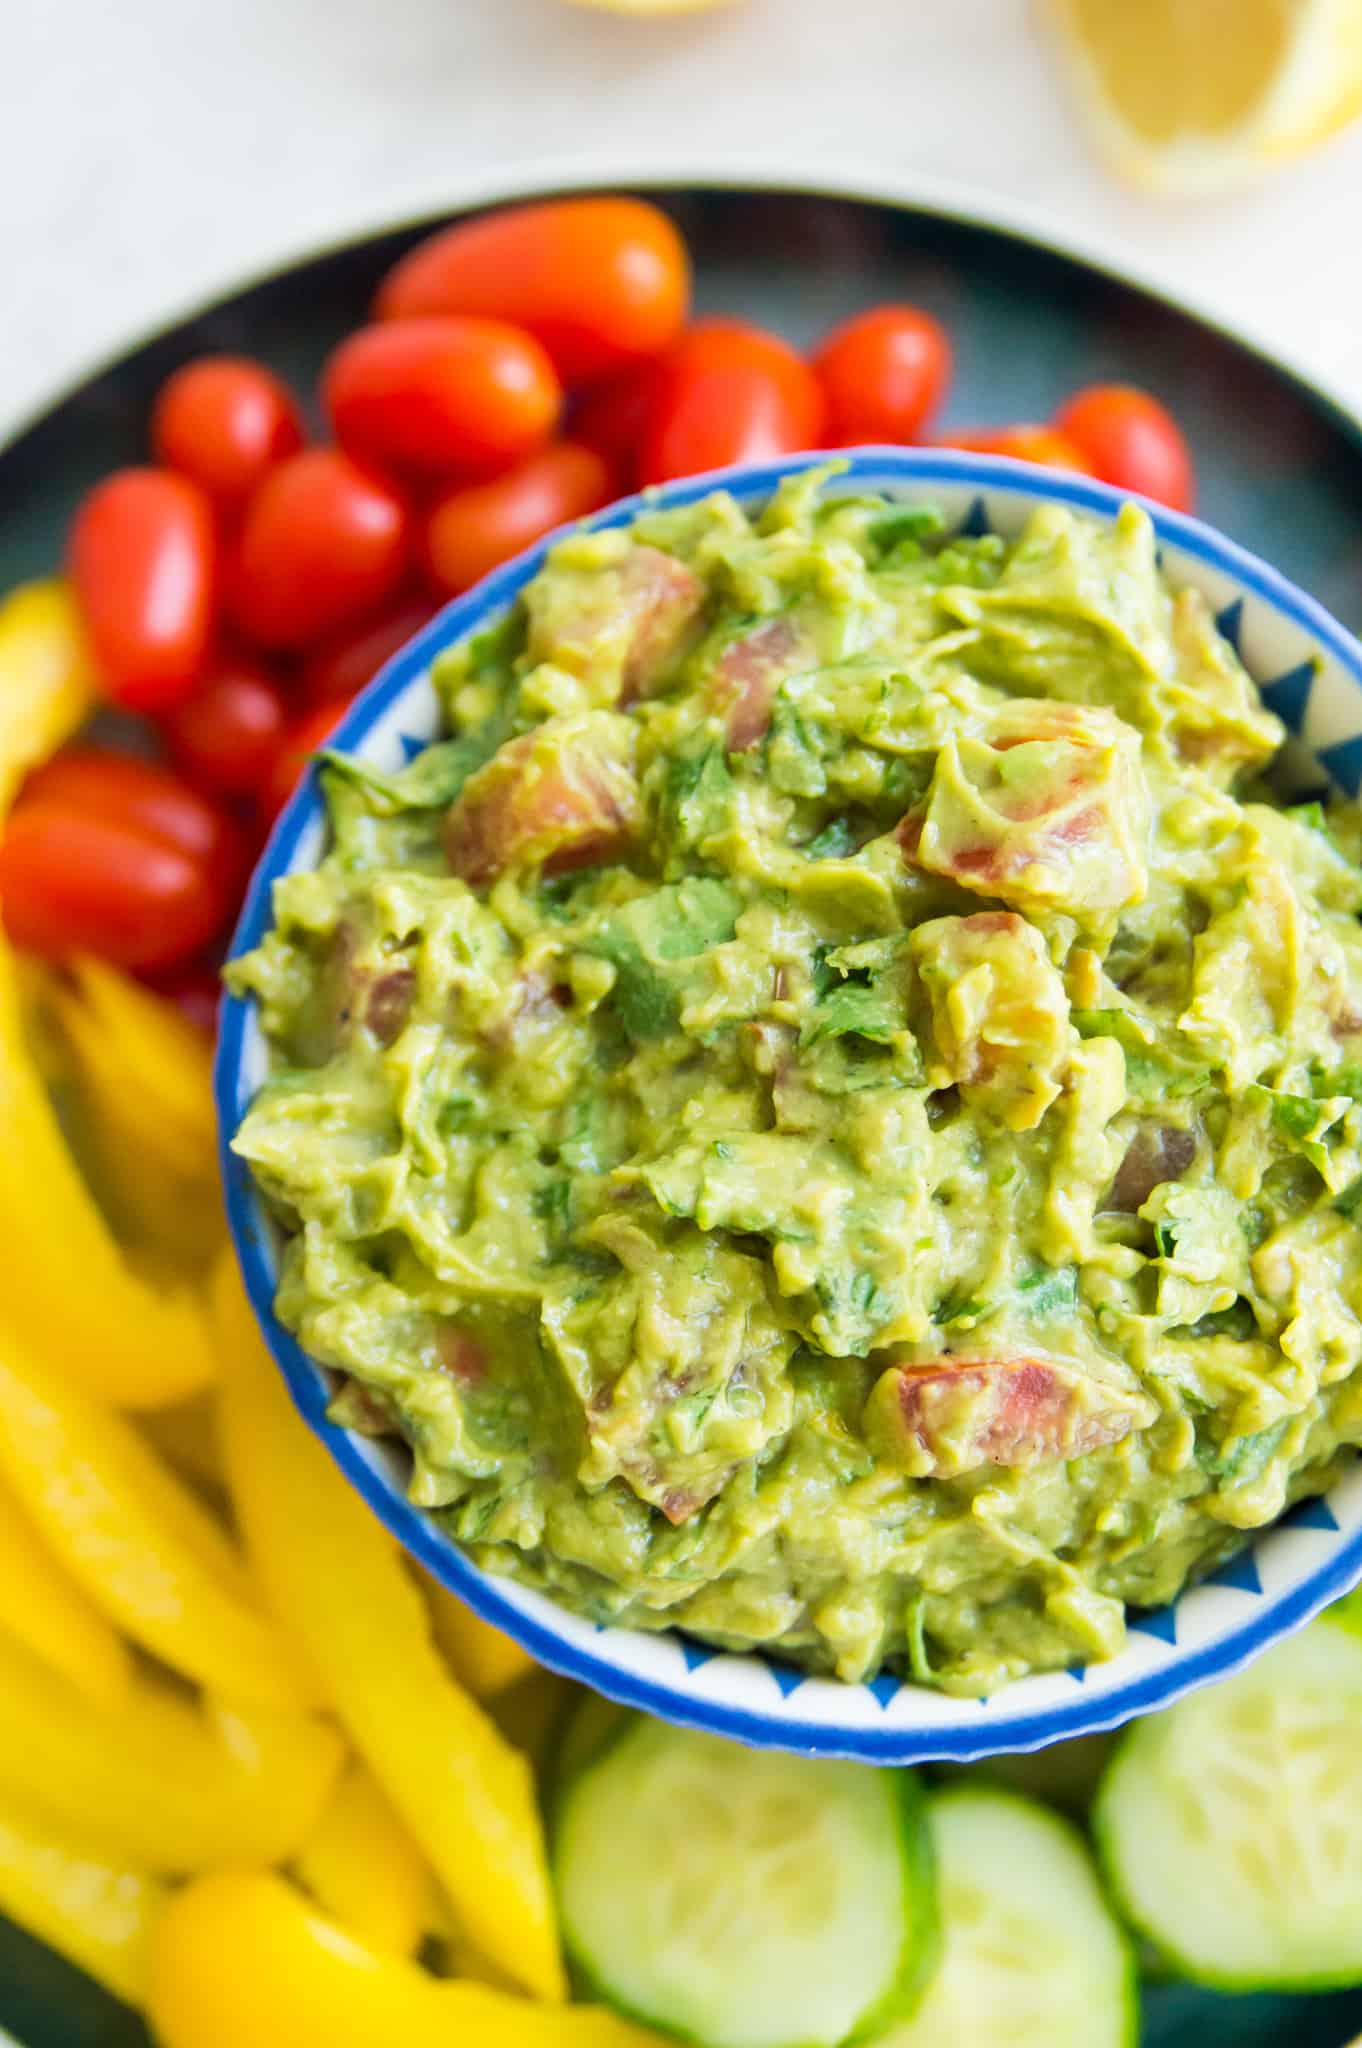 A bowl of guacamole surrounded by raw veggies.